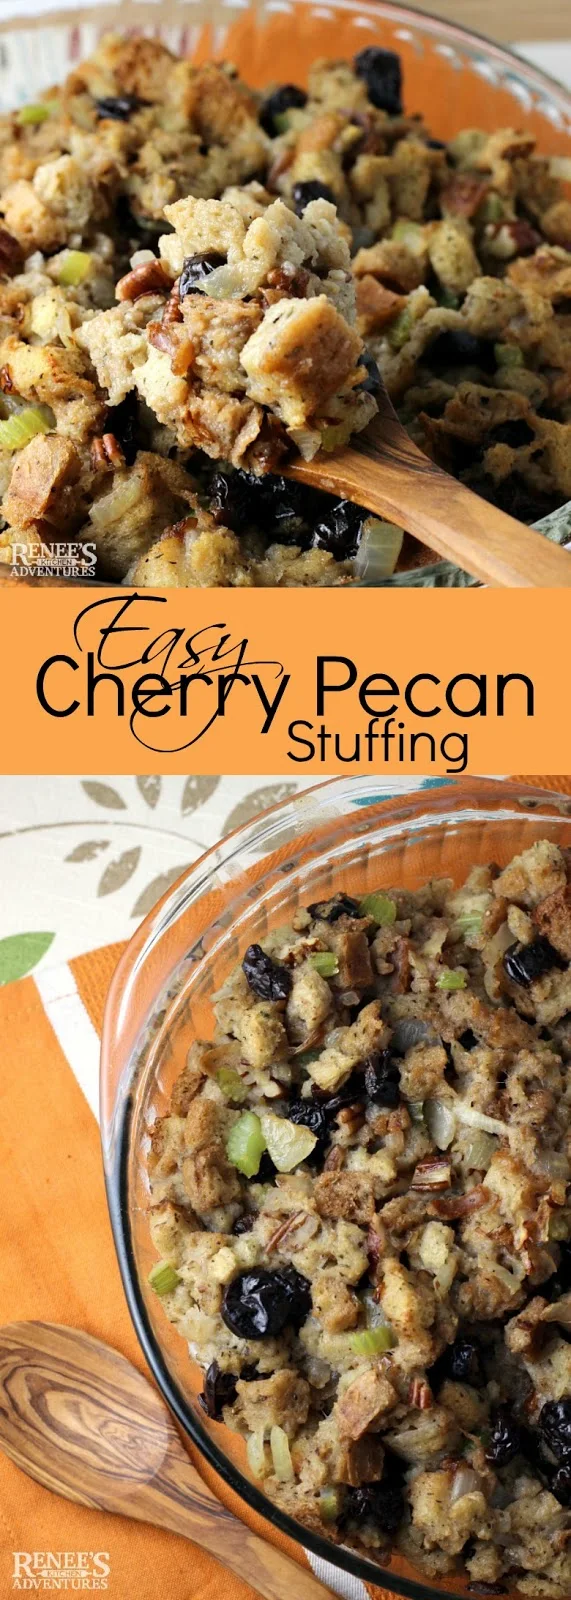 Easy Cherry Pecan Stuffing | by Renee's Kitchen Adventures - Easy recipe for stuffing or dressing made with tart dried cherries and crunchy pecans perfect side dish for chicken, turkey, pork, or beef! Makes a great holiday side dish! #stuffing #easyrecipe #dressing #driedcherries #pecans #Thanksgiving #Holidaysidedish 